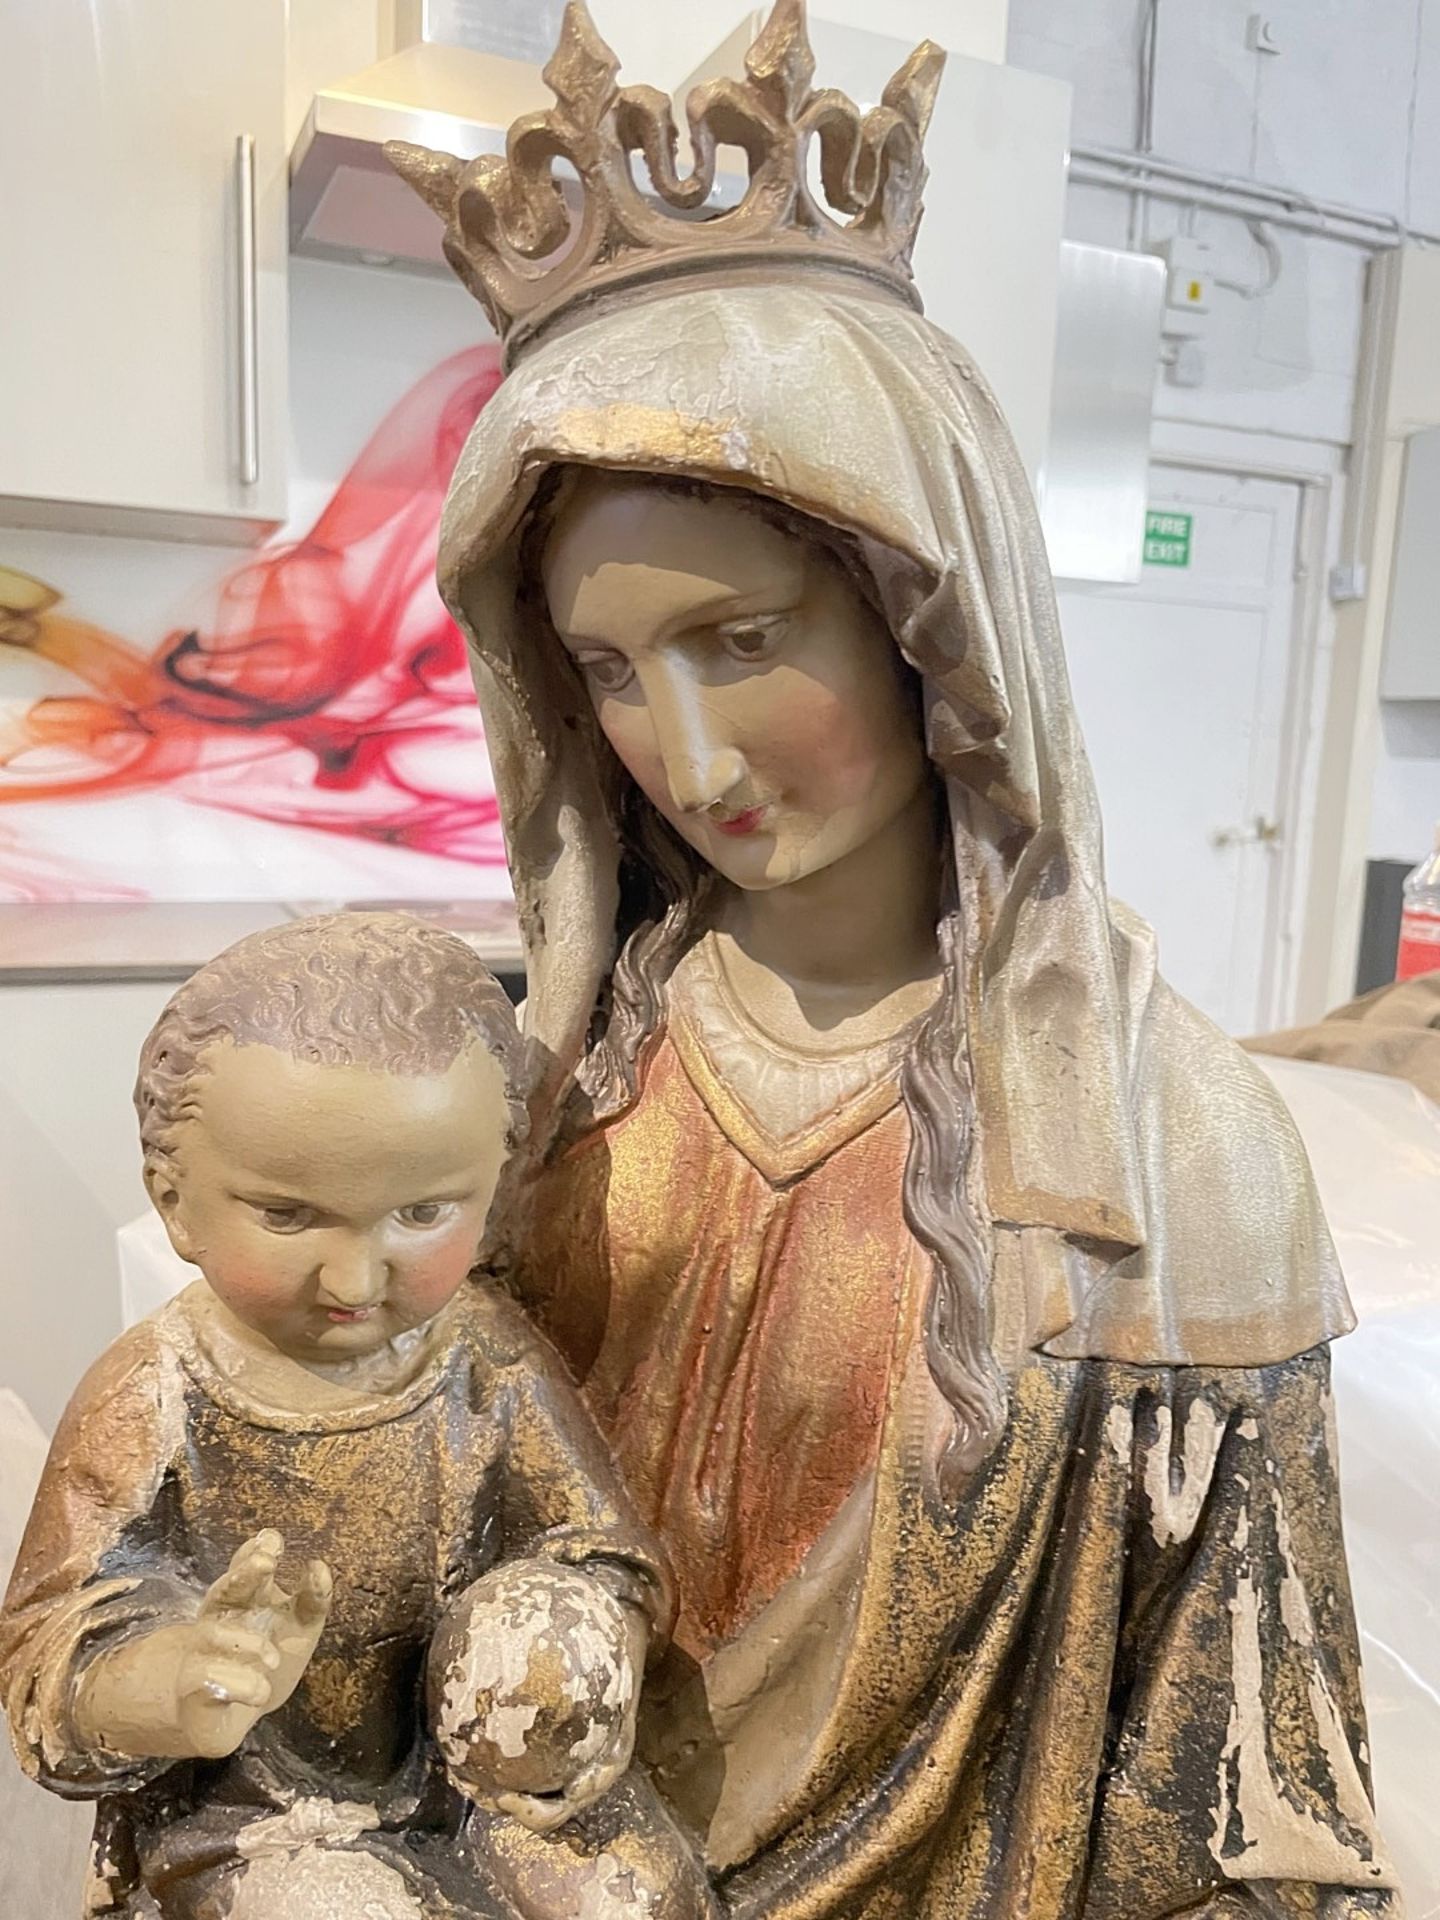 1 x Large Statue of Mary and Baby Jesus - Recently Removed from a Luxury Furniture Retailer - Ref: D - Image 2 of 5